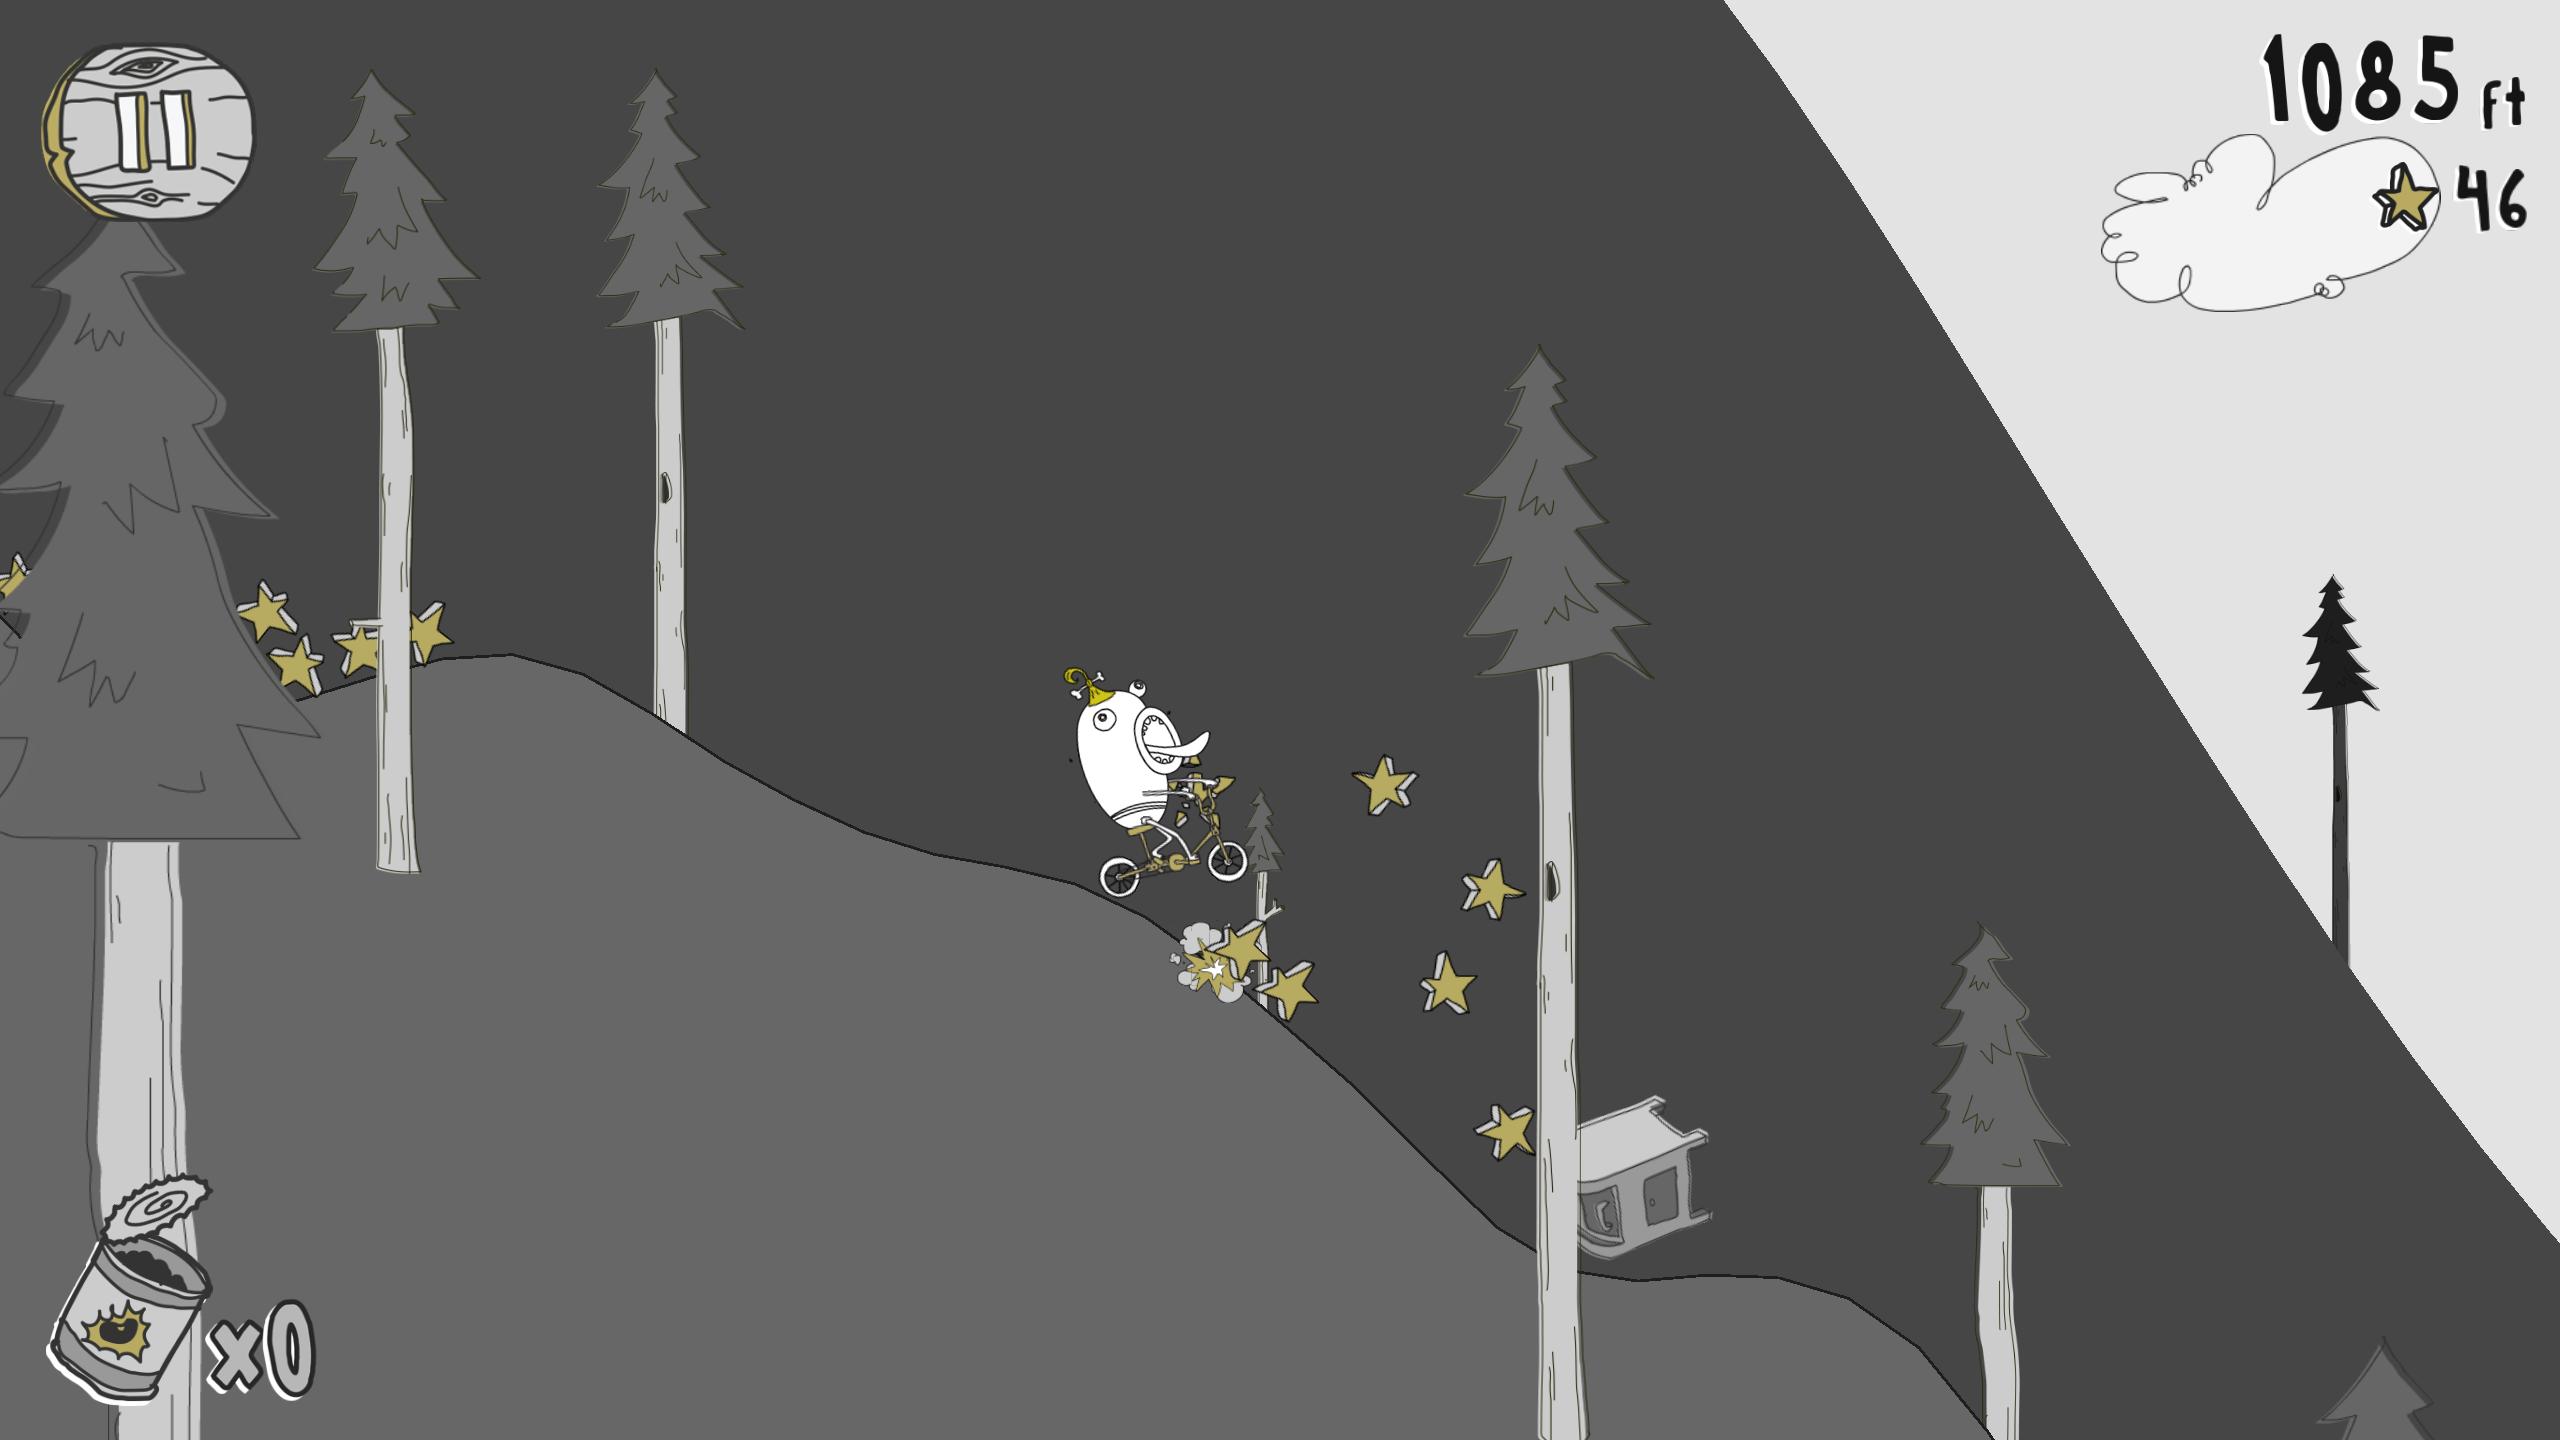 Doofus Drop Silly Rider - Learn to Fart & Fly 1.0.23 Screenshot 5